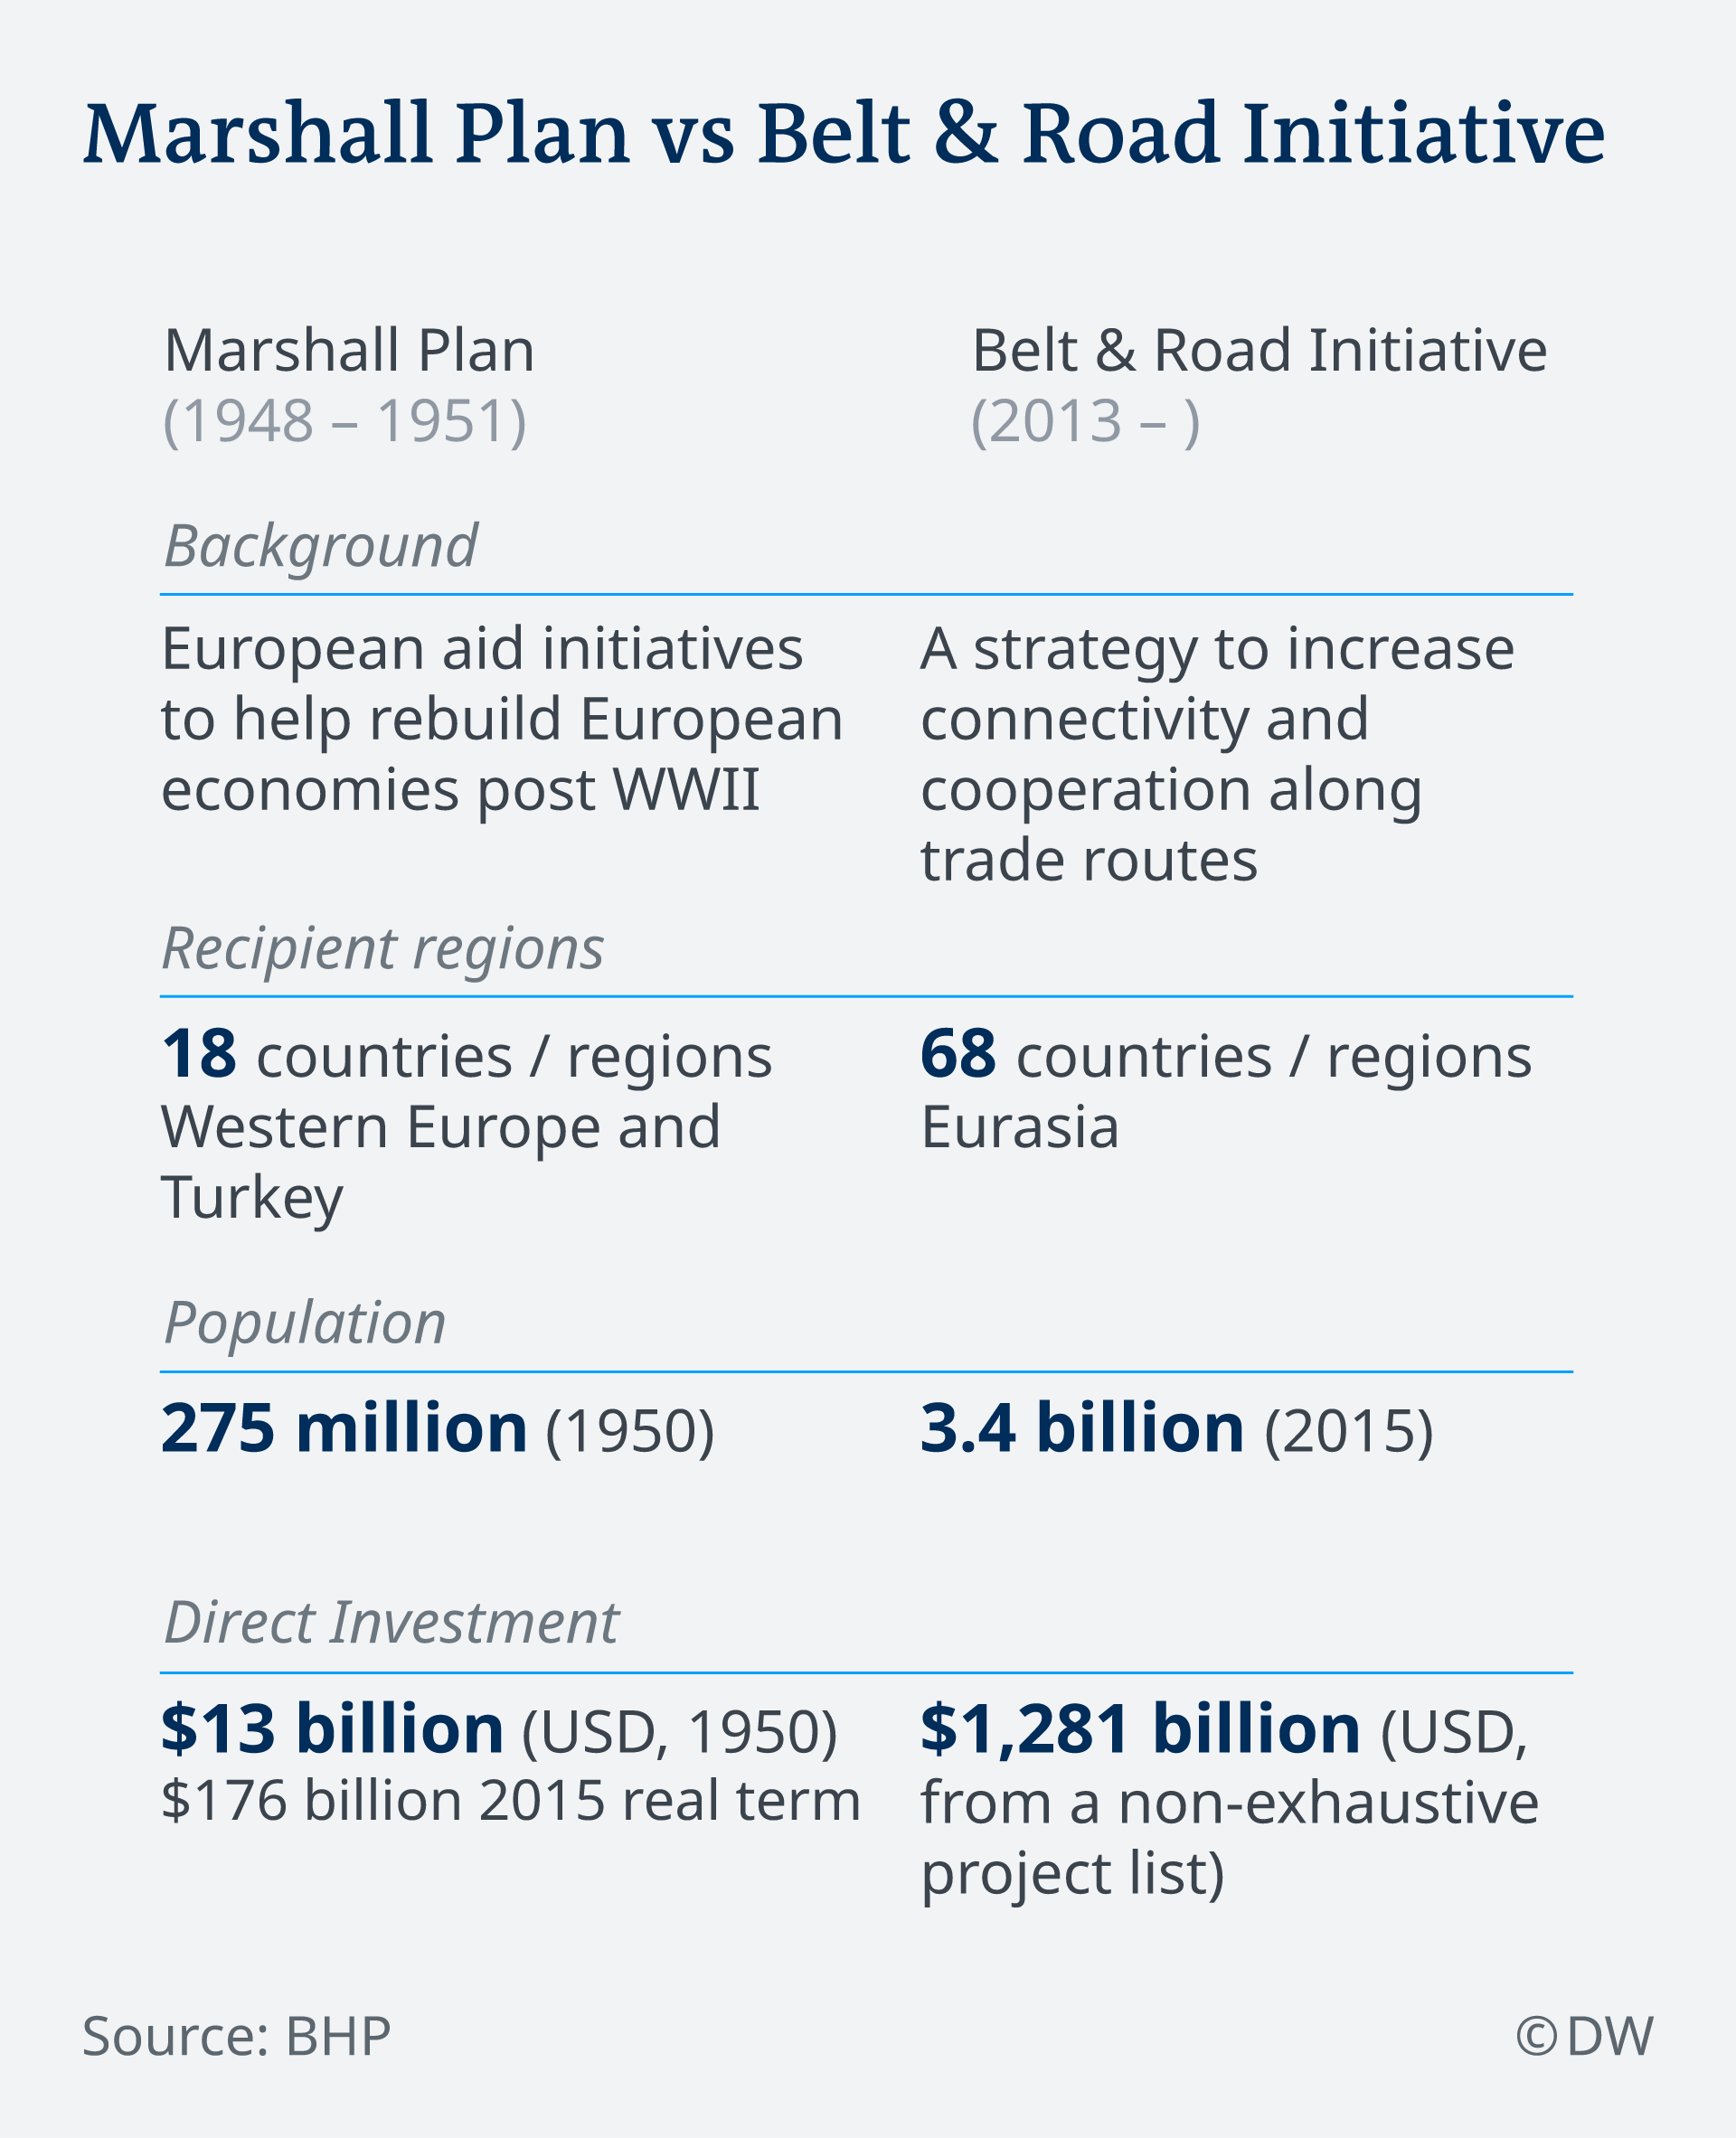 An infographic comparing Marshall Plan and China's Belt and Road Initiative